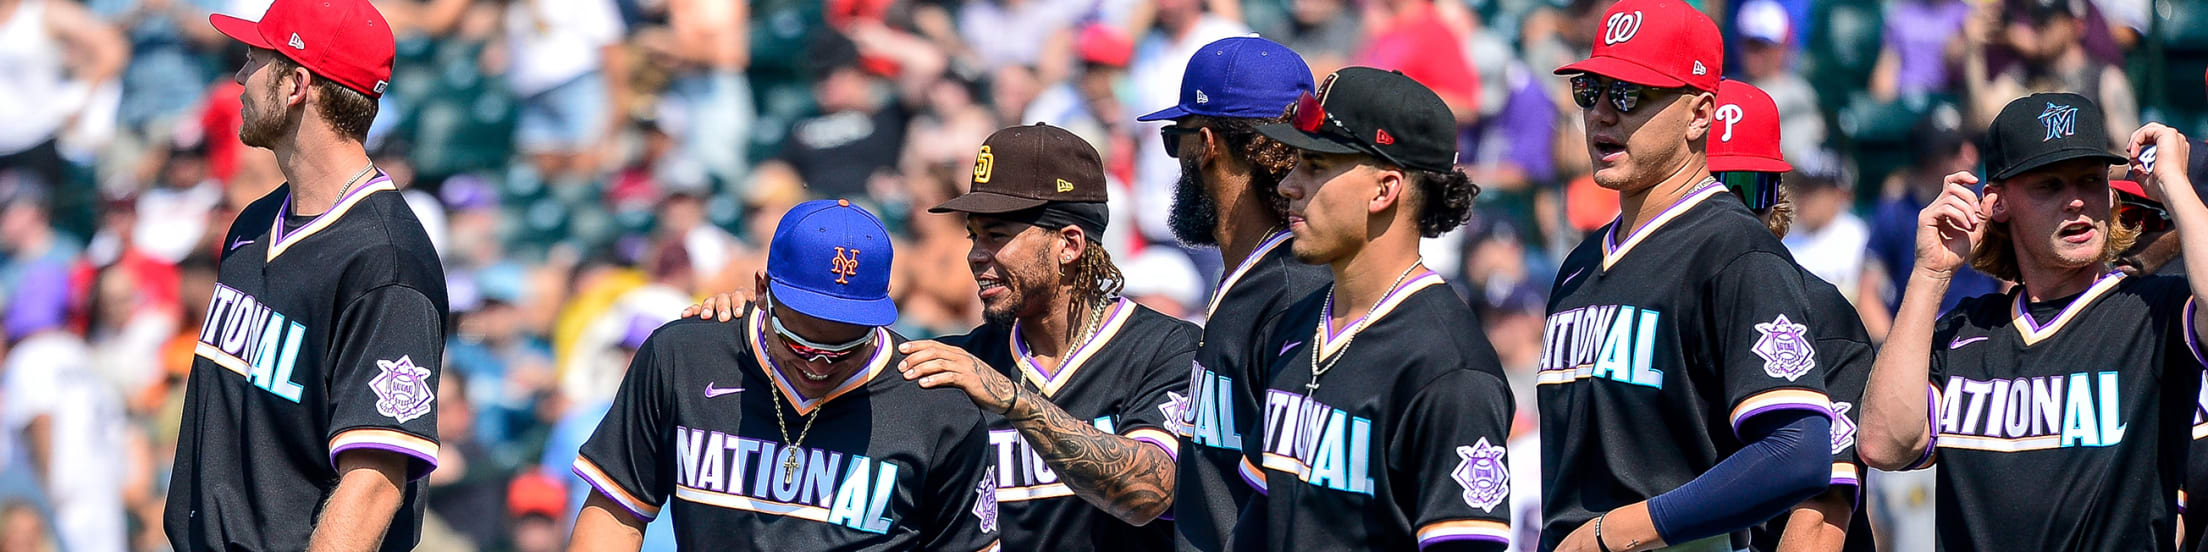 MLB unveiled rosters for the All-Star Futures Game